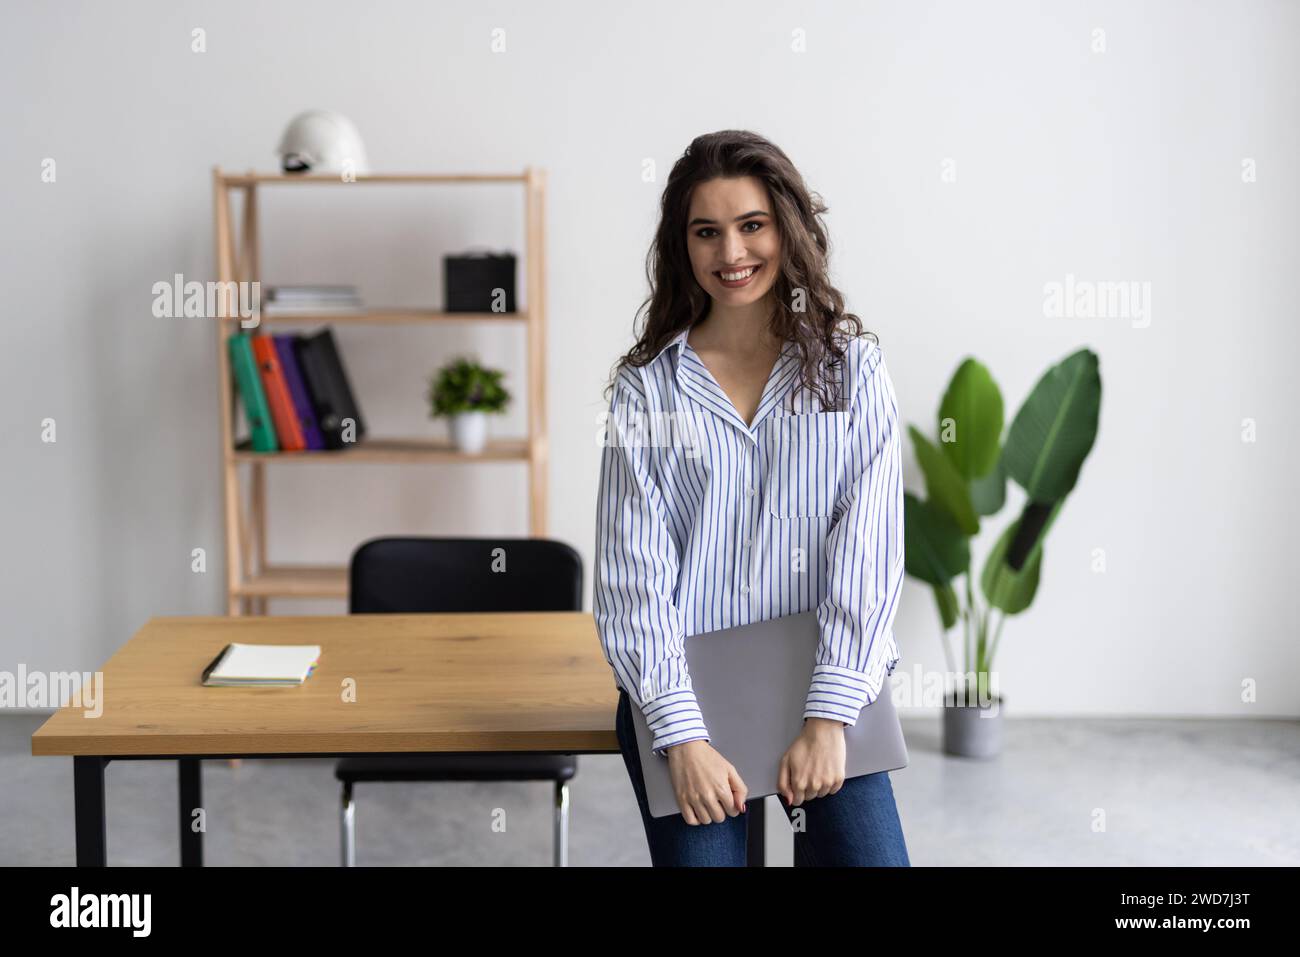 Smiling businesswoman holding open laptop in office Stock Photo